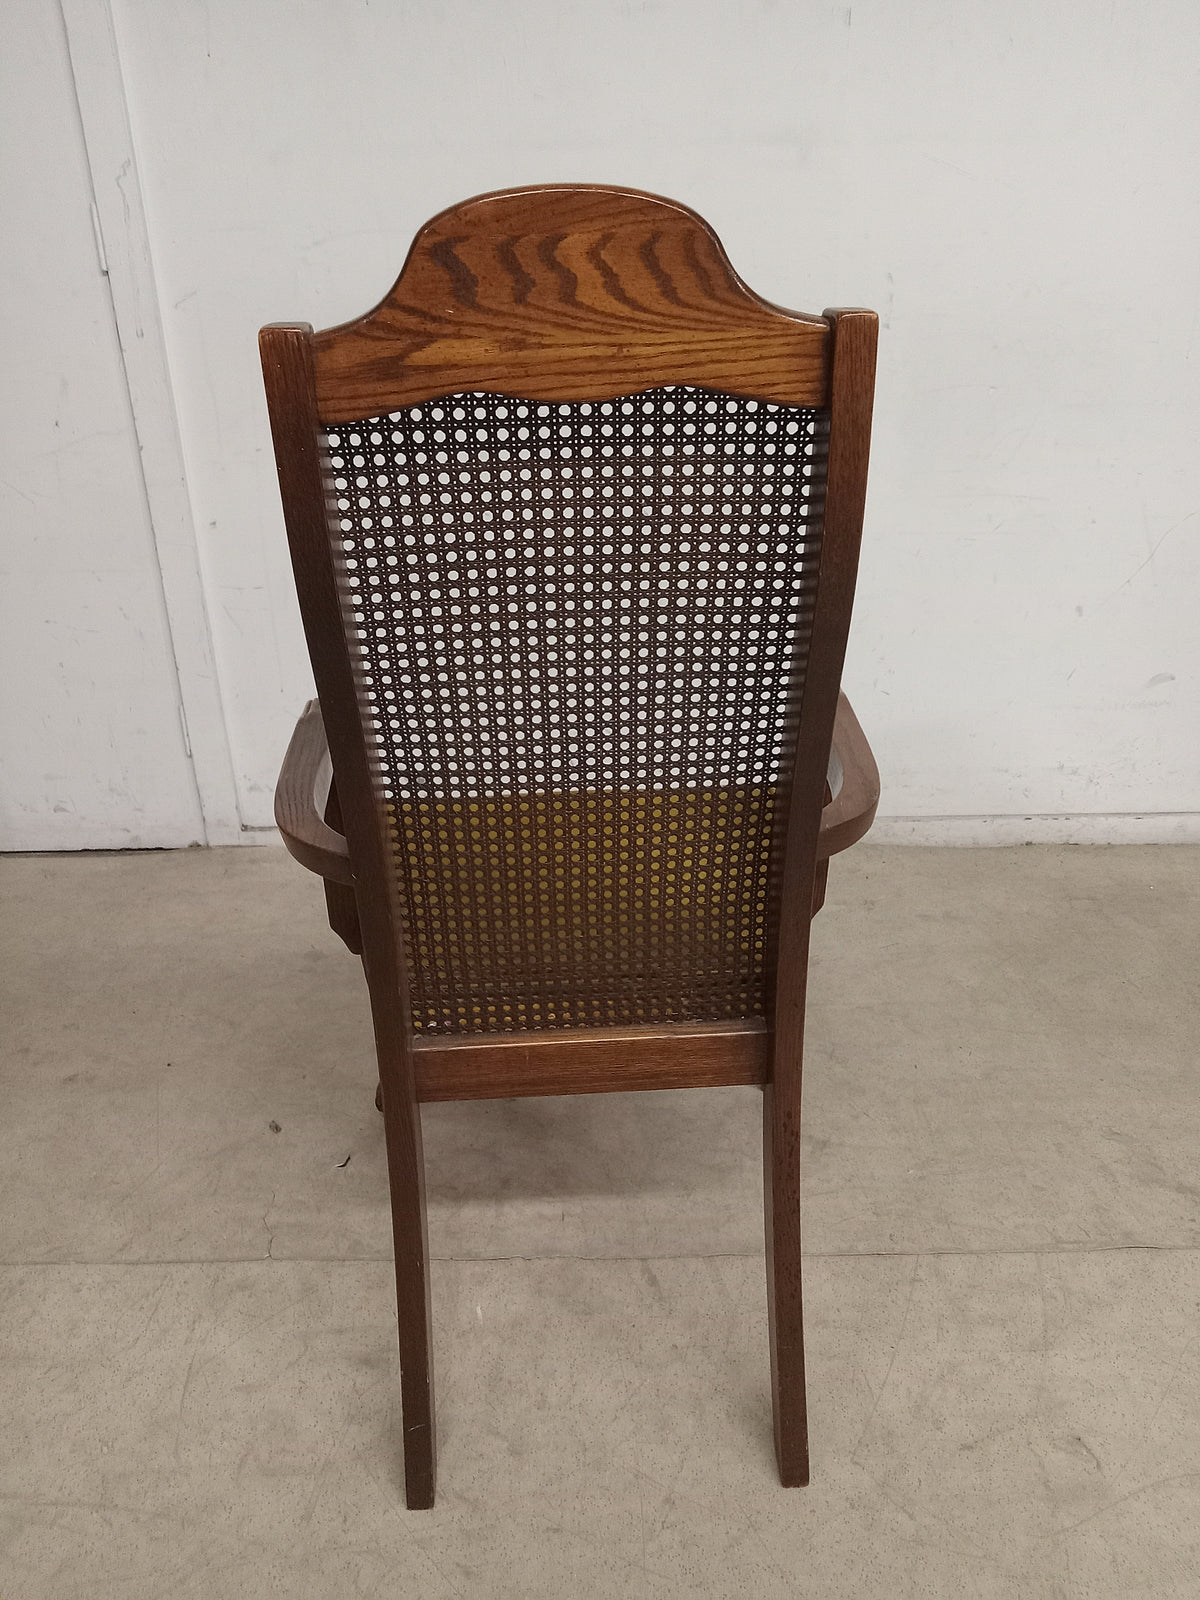 Set of 4 19.5"W Vintage Solid Wooden Chairs